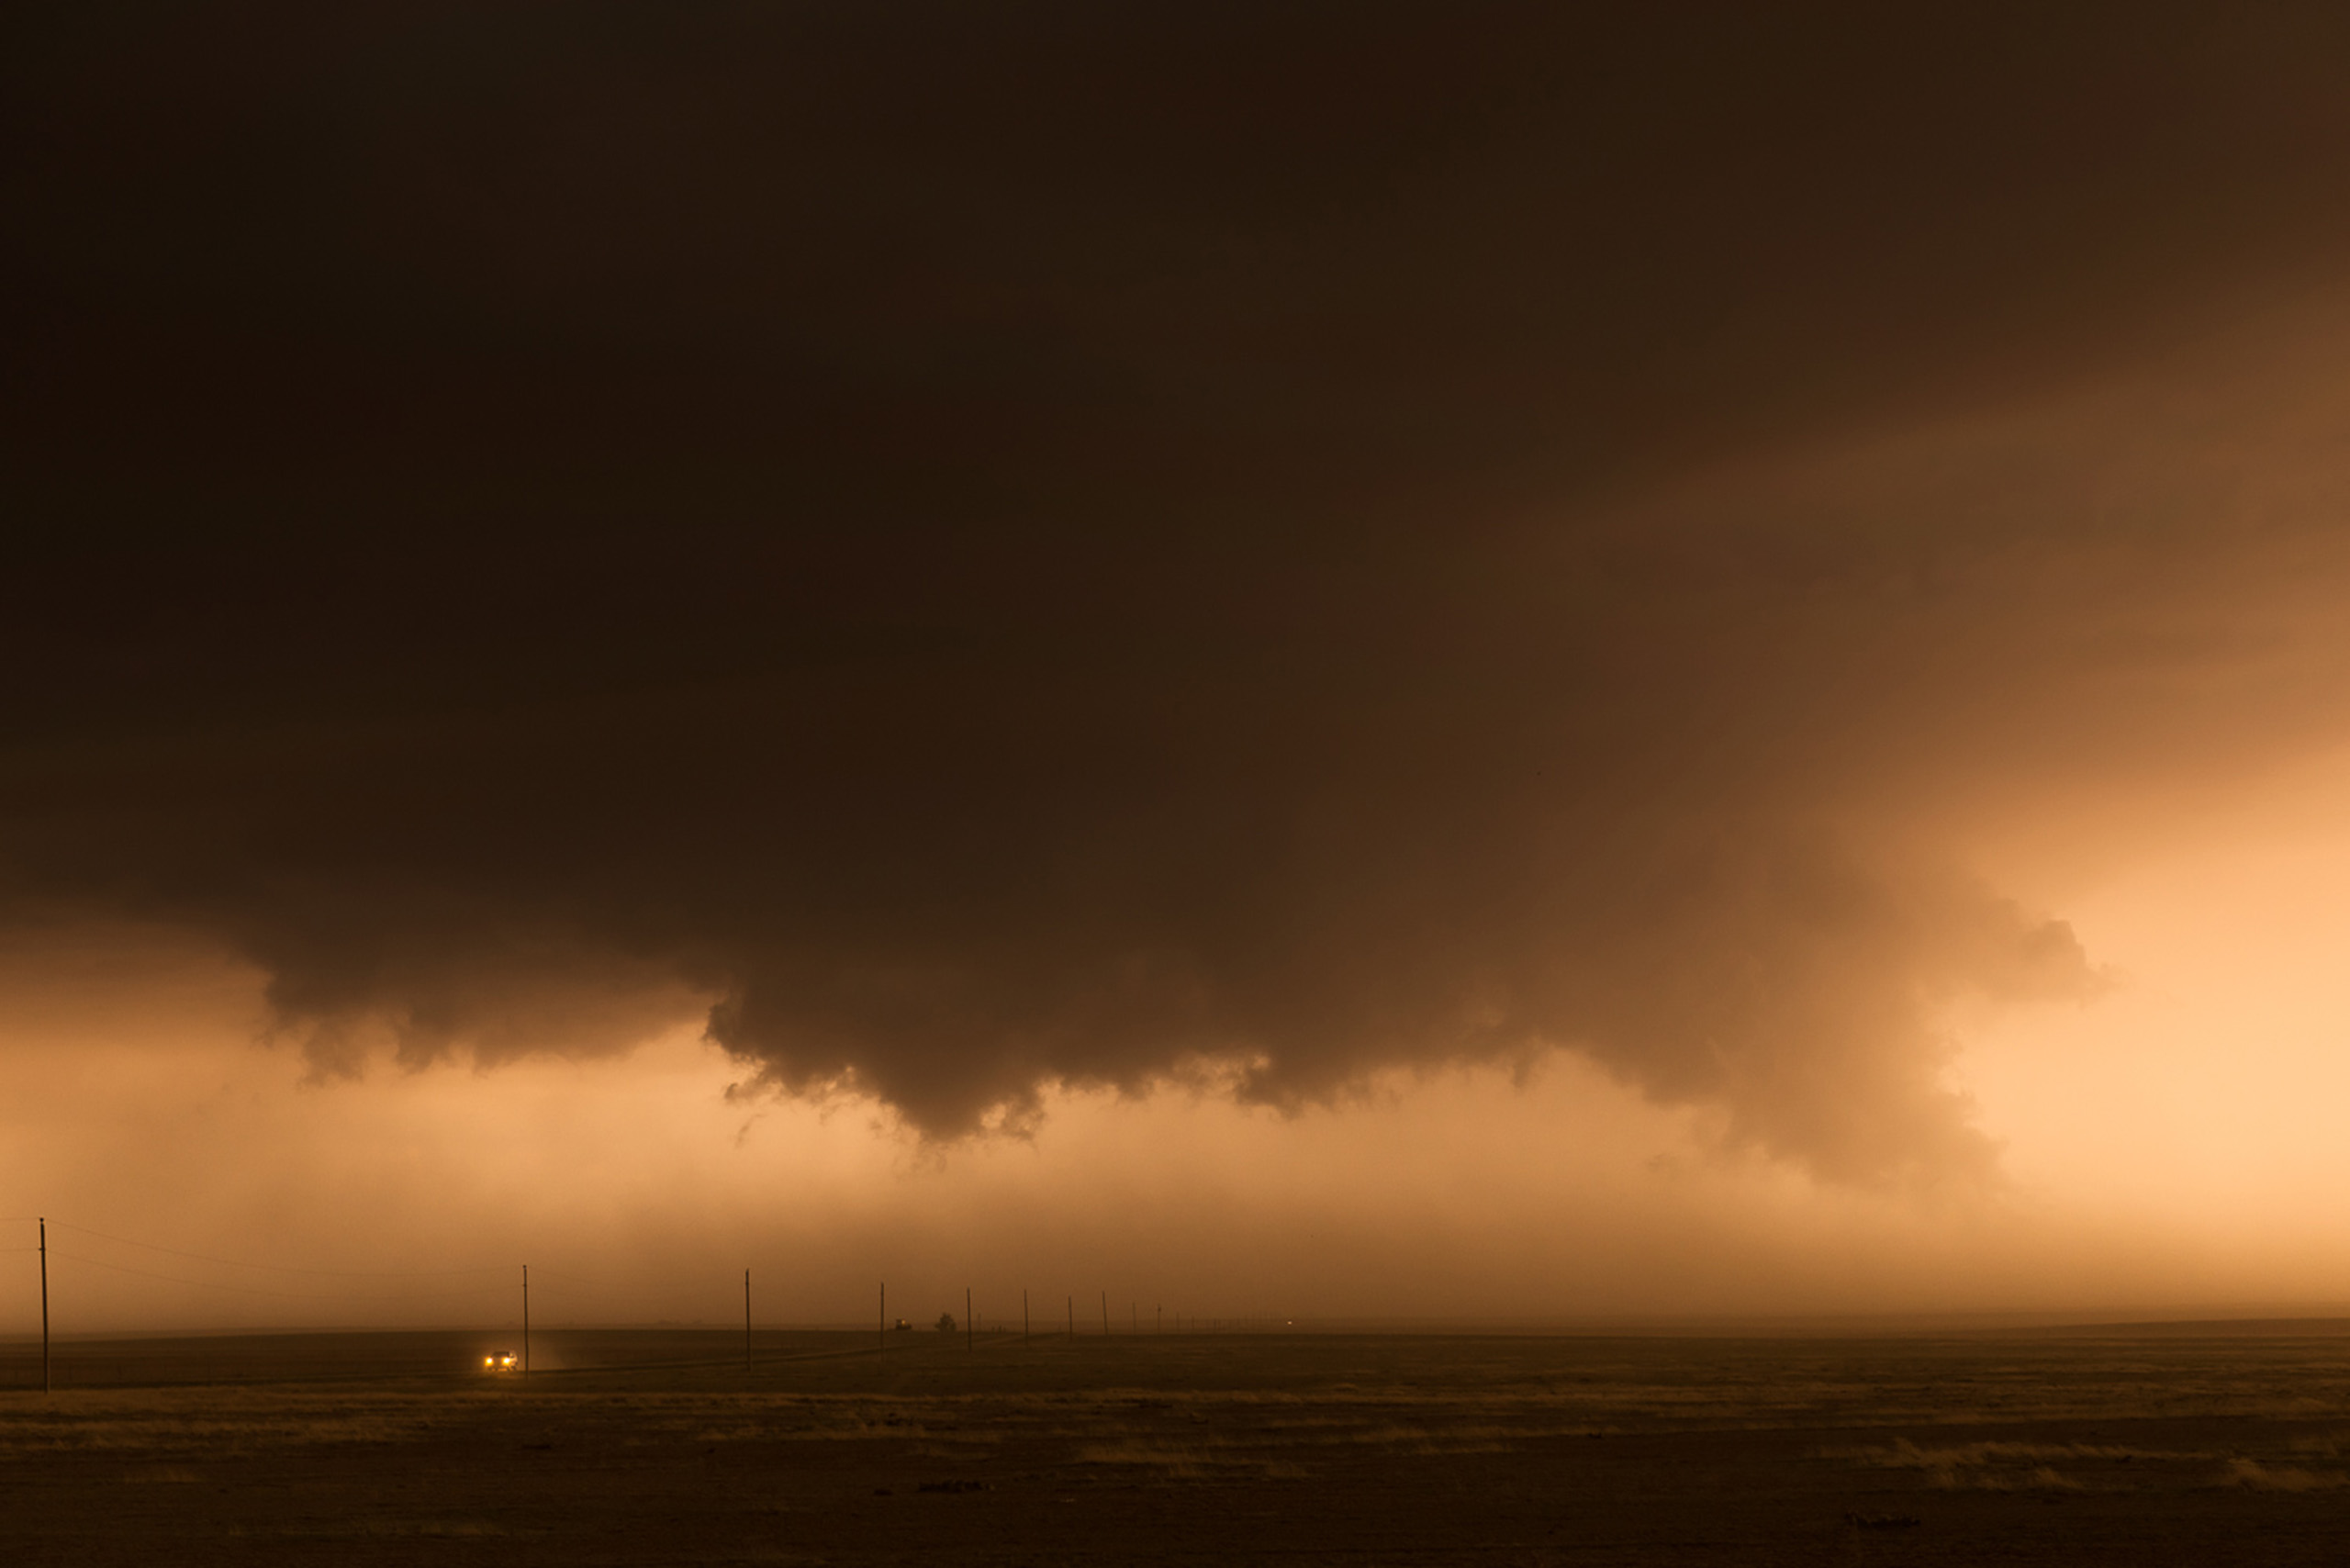 Car caught in a dust-filled wall cloud, near Haswell, Colorado.